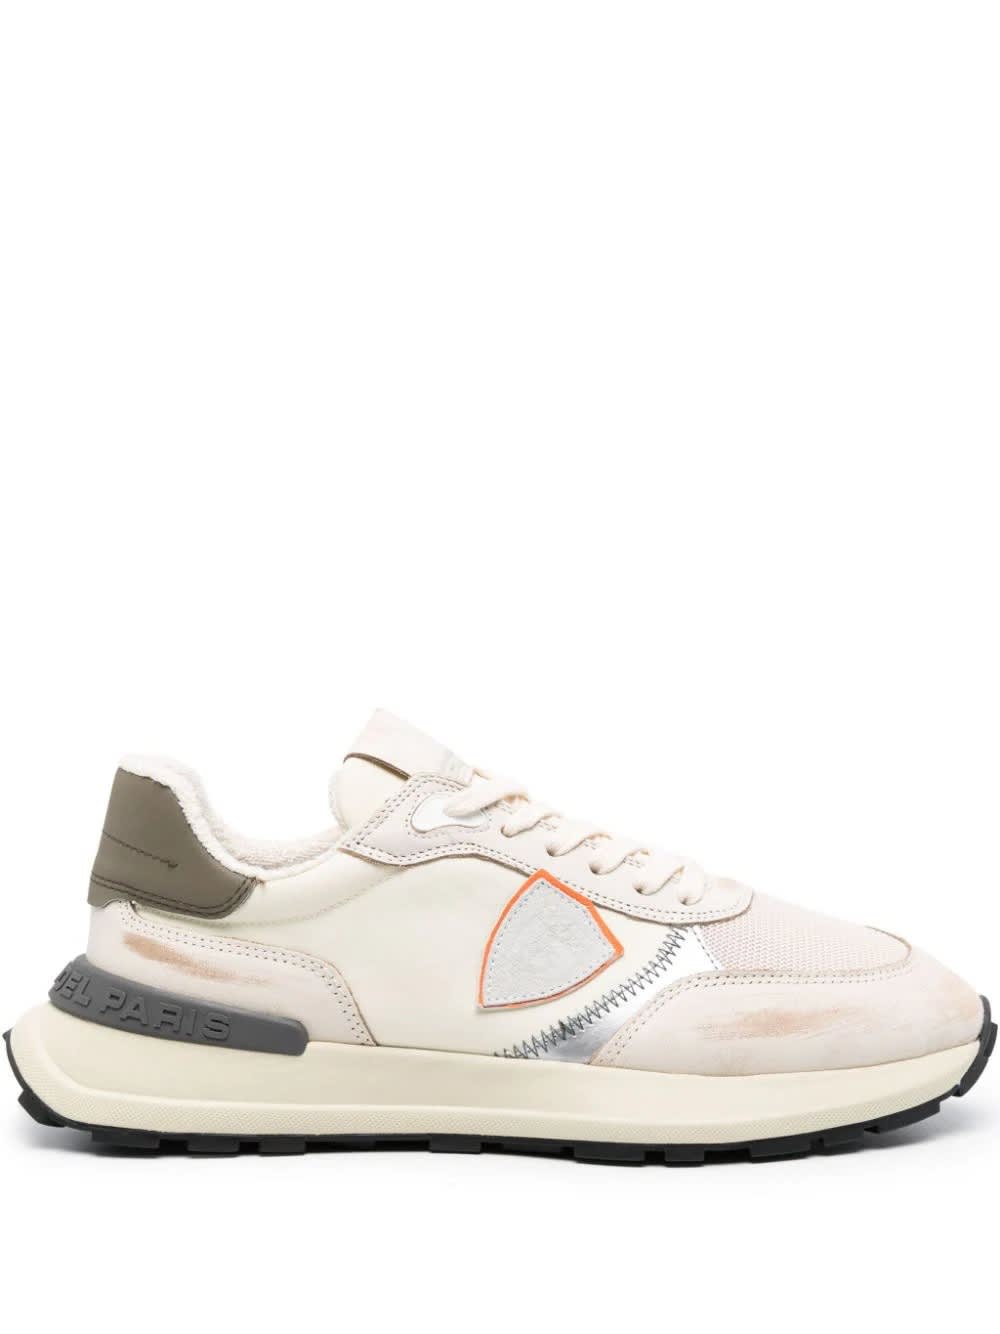 Philippe Model Antibes Sneakers - White, Orange And Military Green In Butter